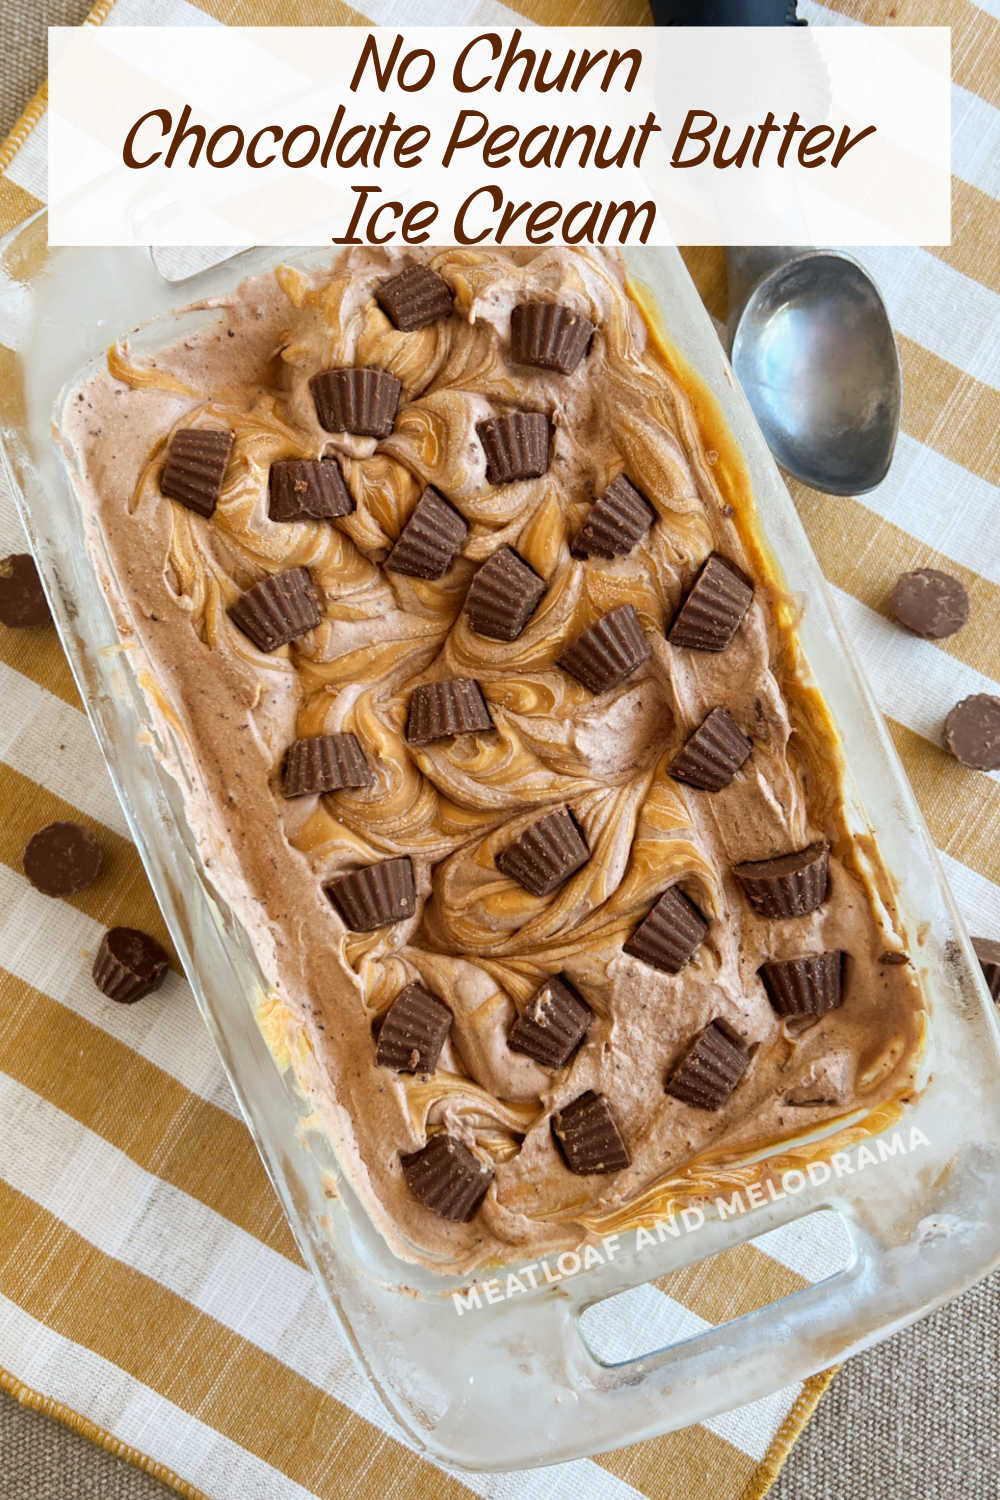 This no churn chocolate peanut butter ice cream recipe makes creamy homemade ice cream without an ice cream maker. This easy recipe is perfect for peanut butter lovers! via @meamel